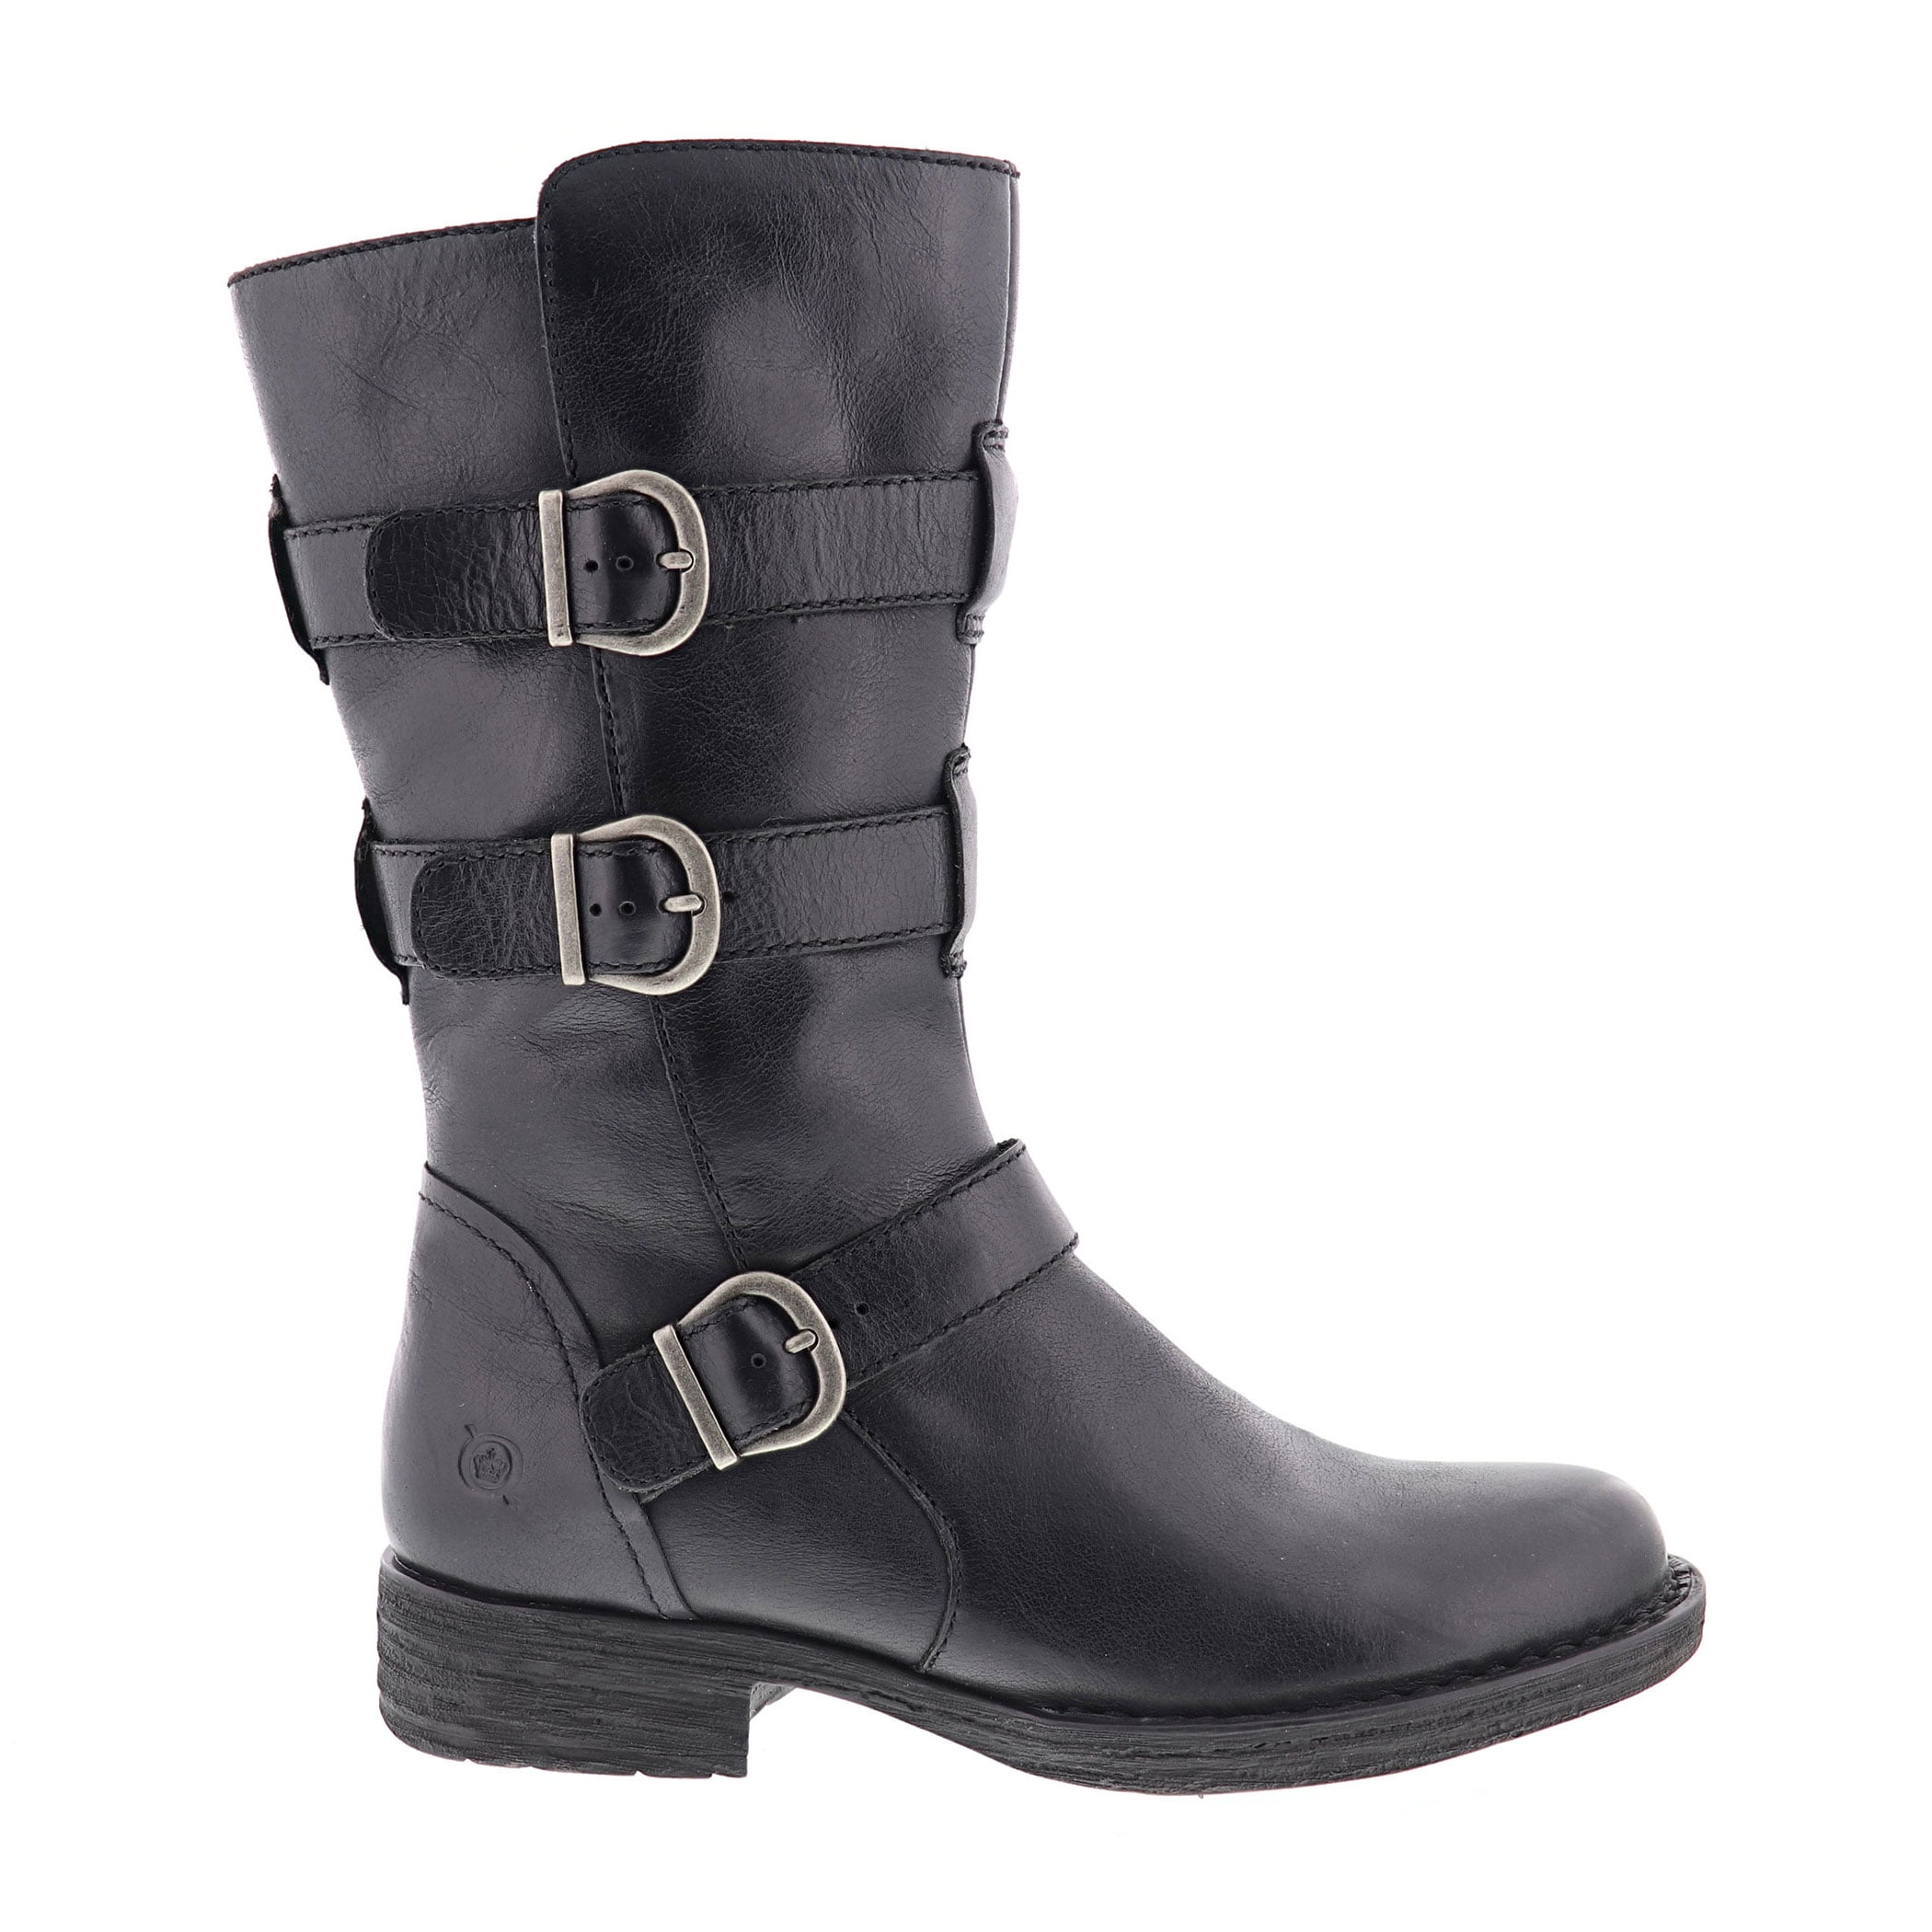 Born Women's Ivy Boots in Black, 7.5 US 